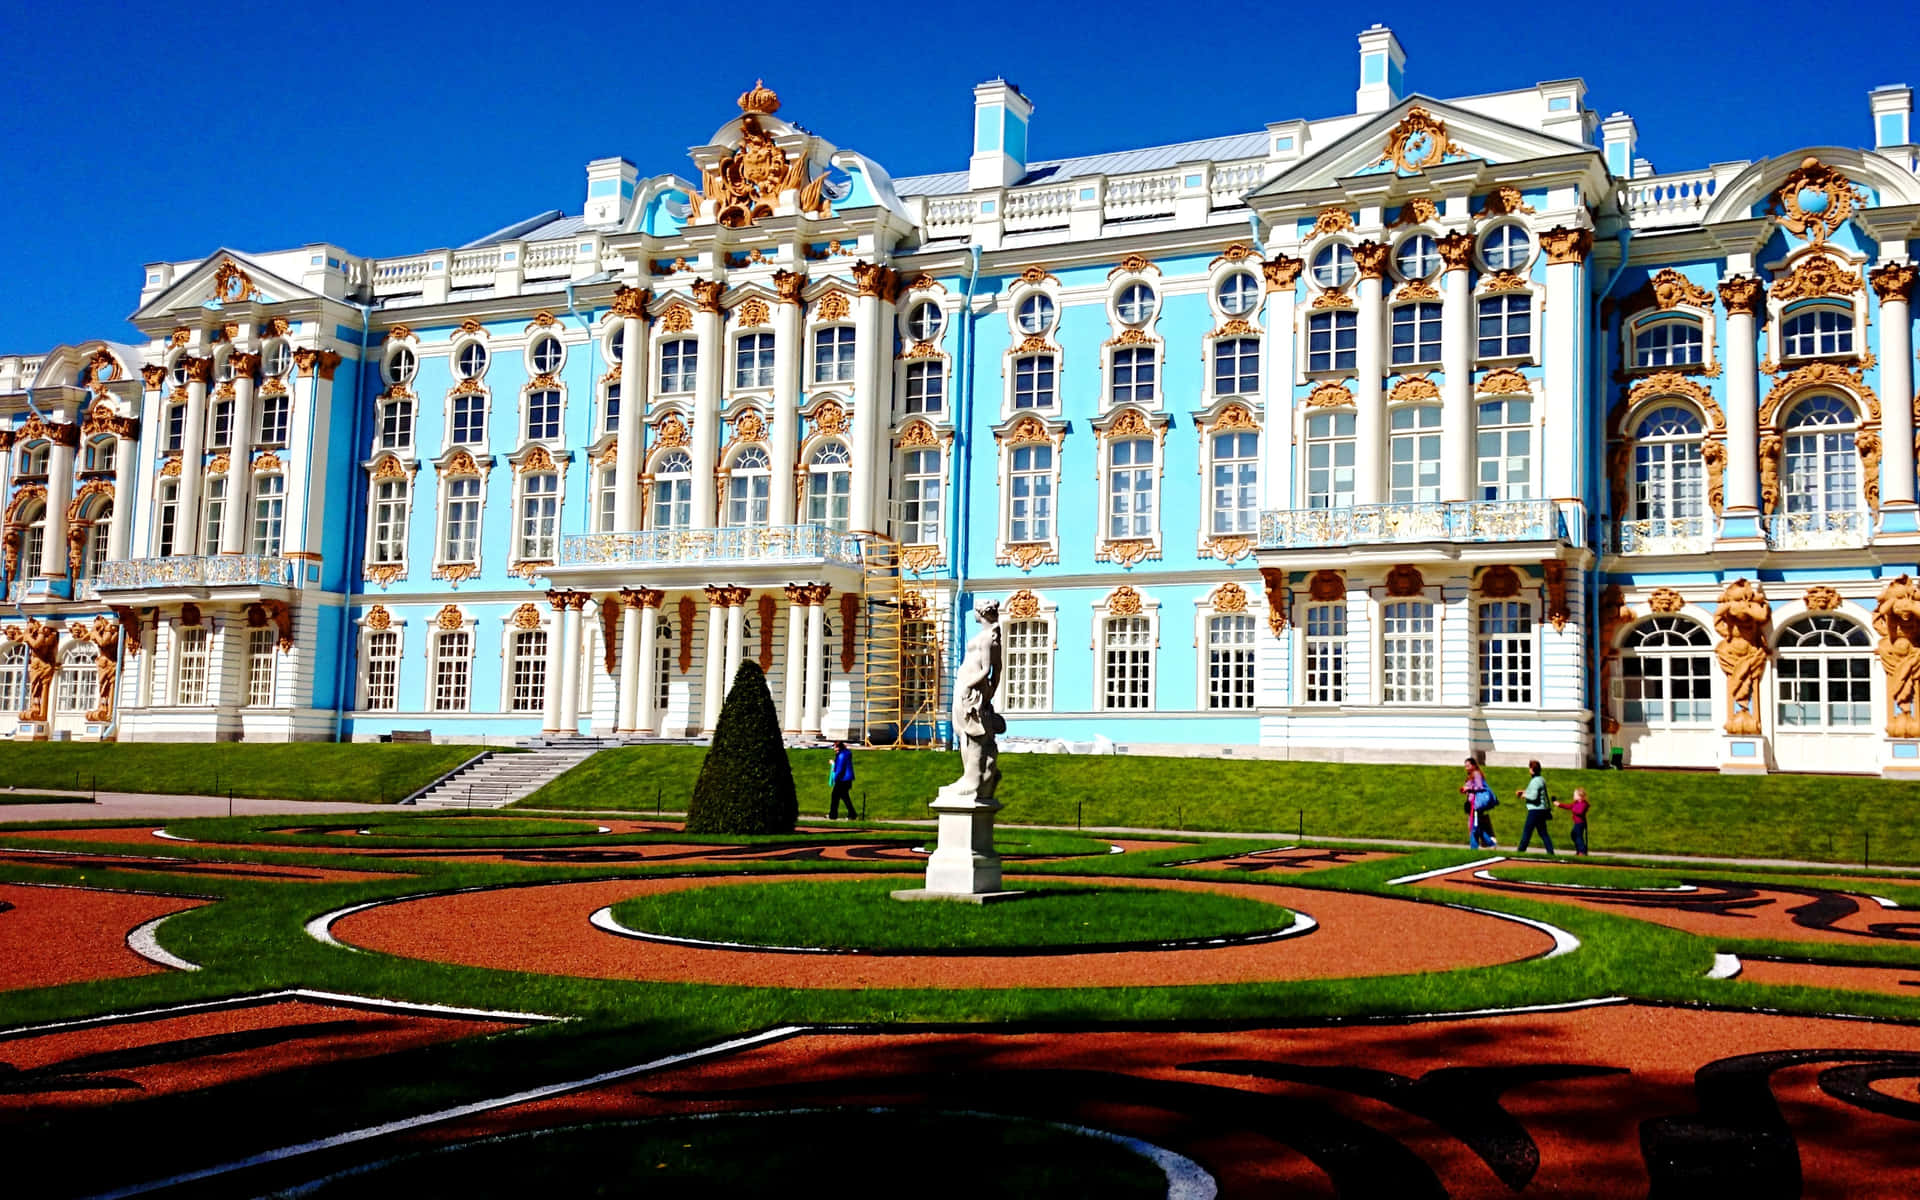 Caption: Majestic Garden Statue at Catherine Palace Wallpaper